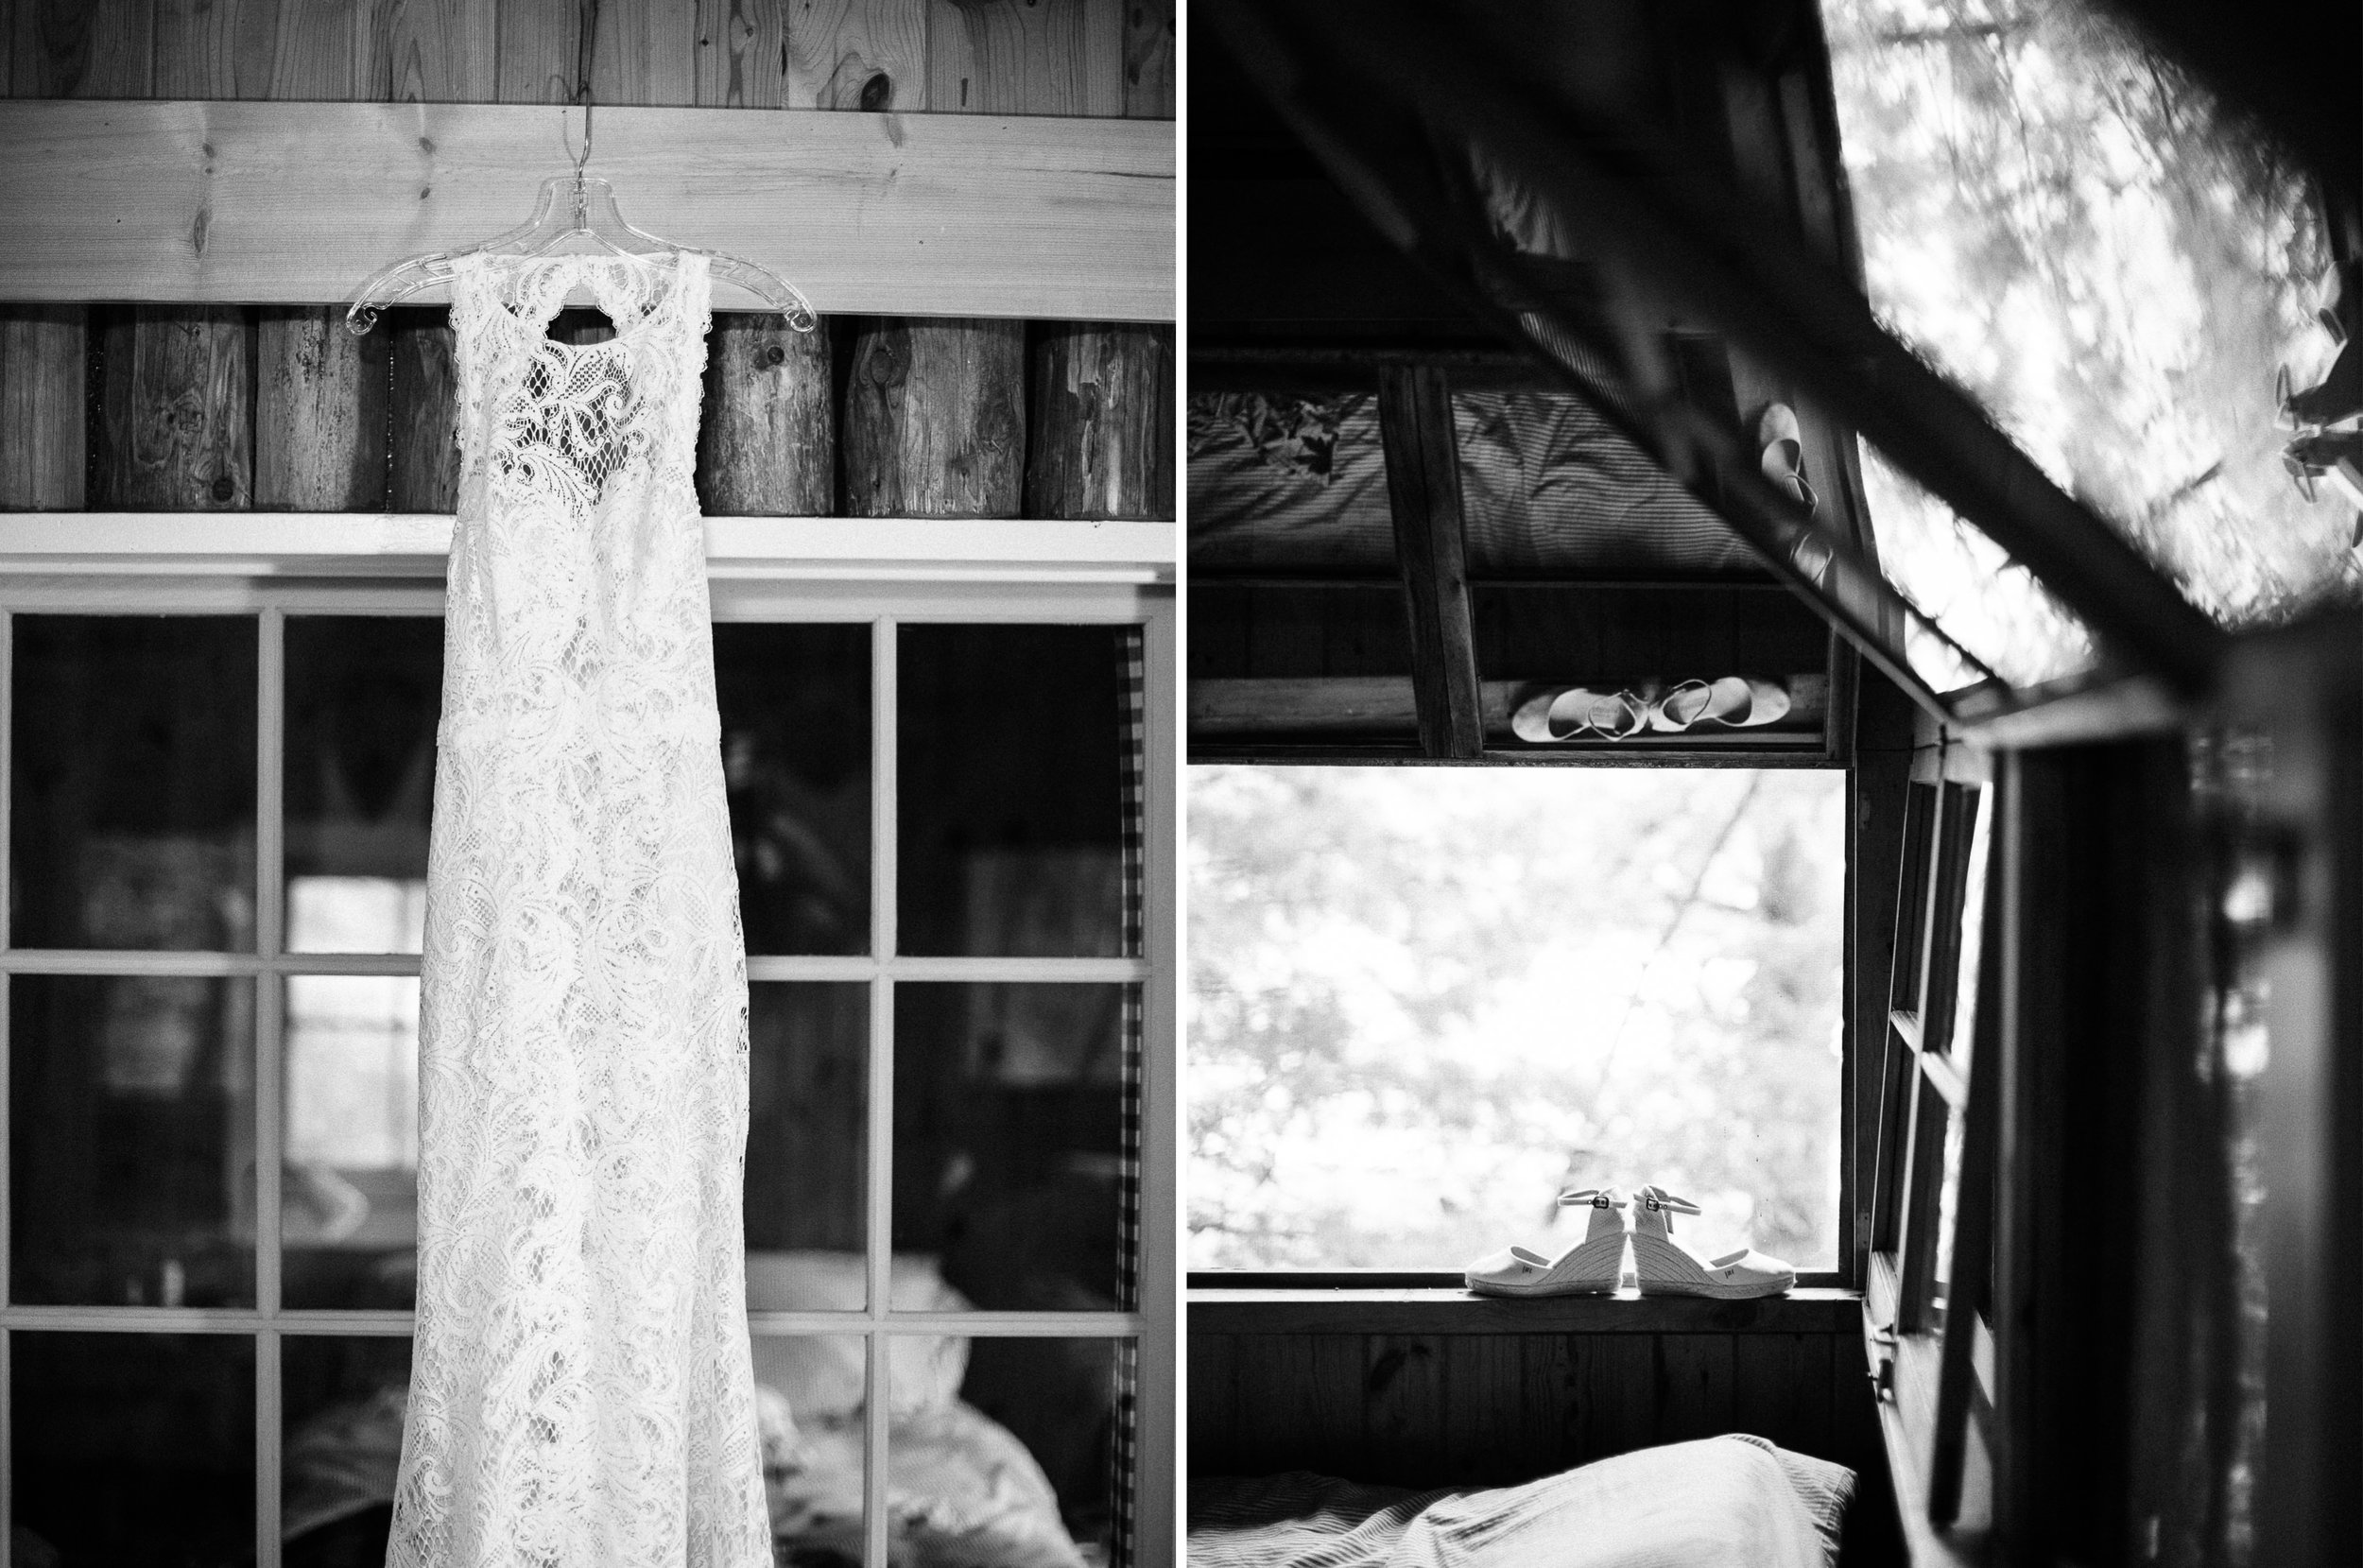 Minnesota wedding at the Couple's Cabin in Northern, MN